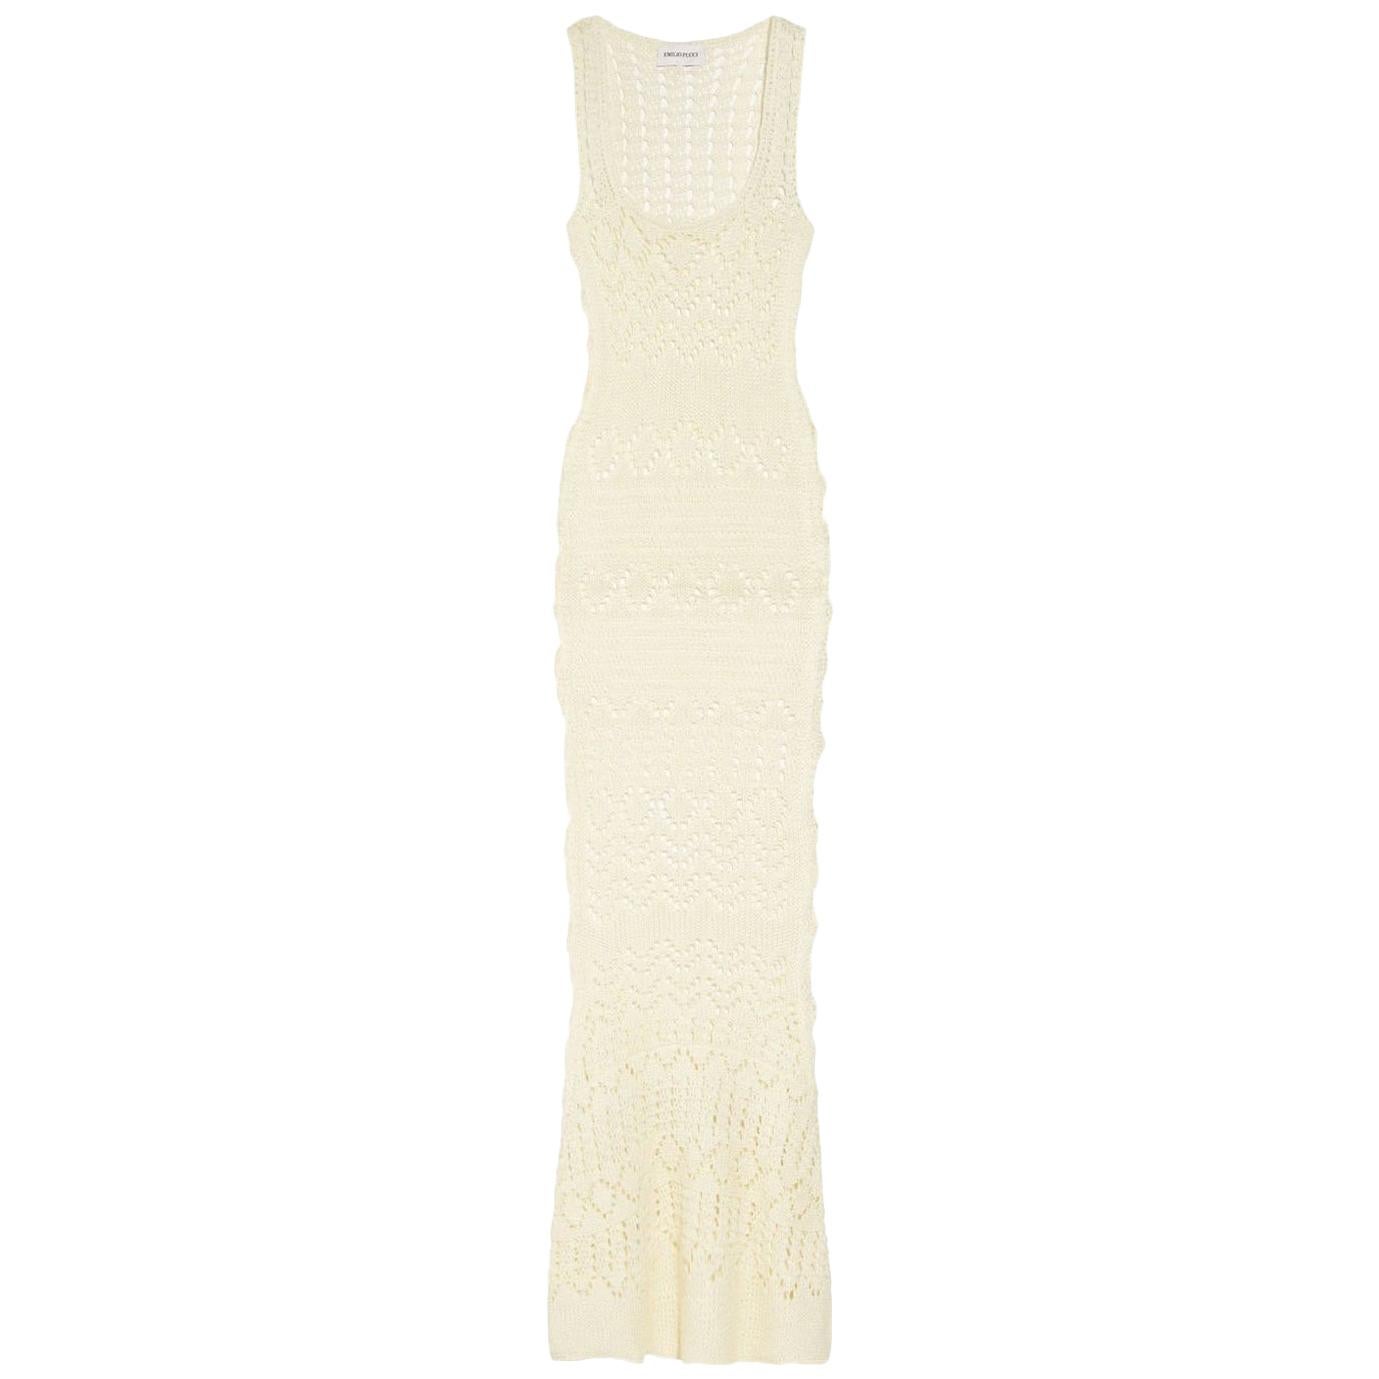 NEW Emilio Pucci by Peter Dundas Studded Ivory Crochet Knit Maxi Dress Gown 42